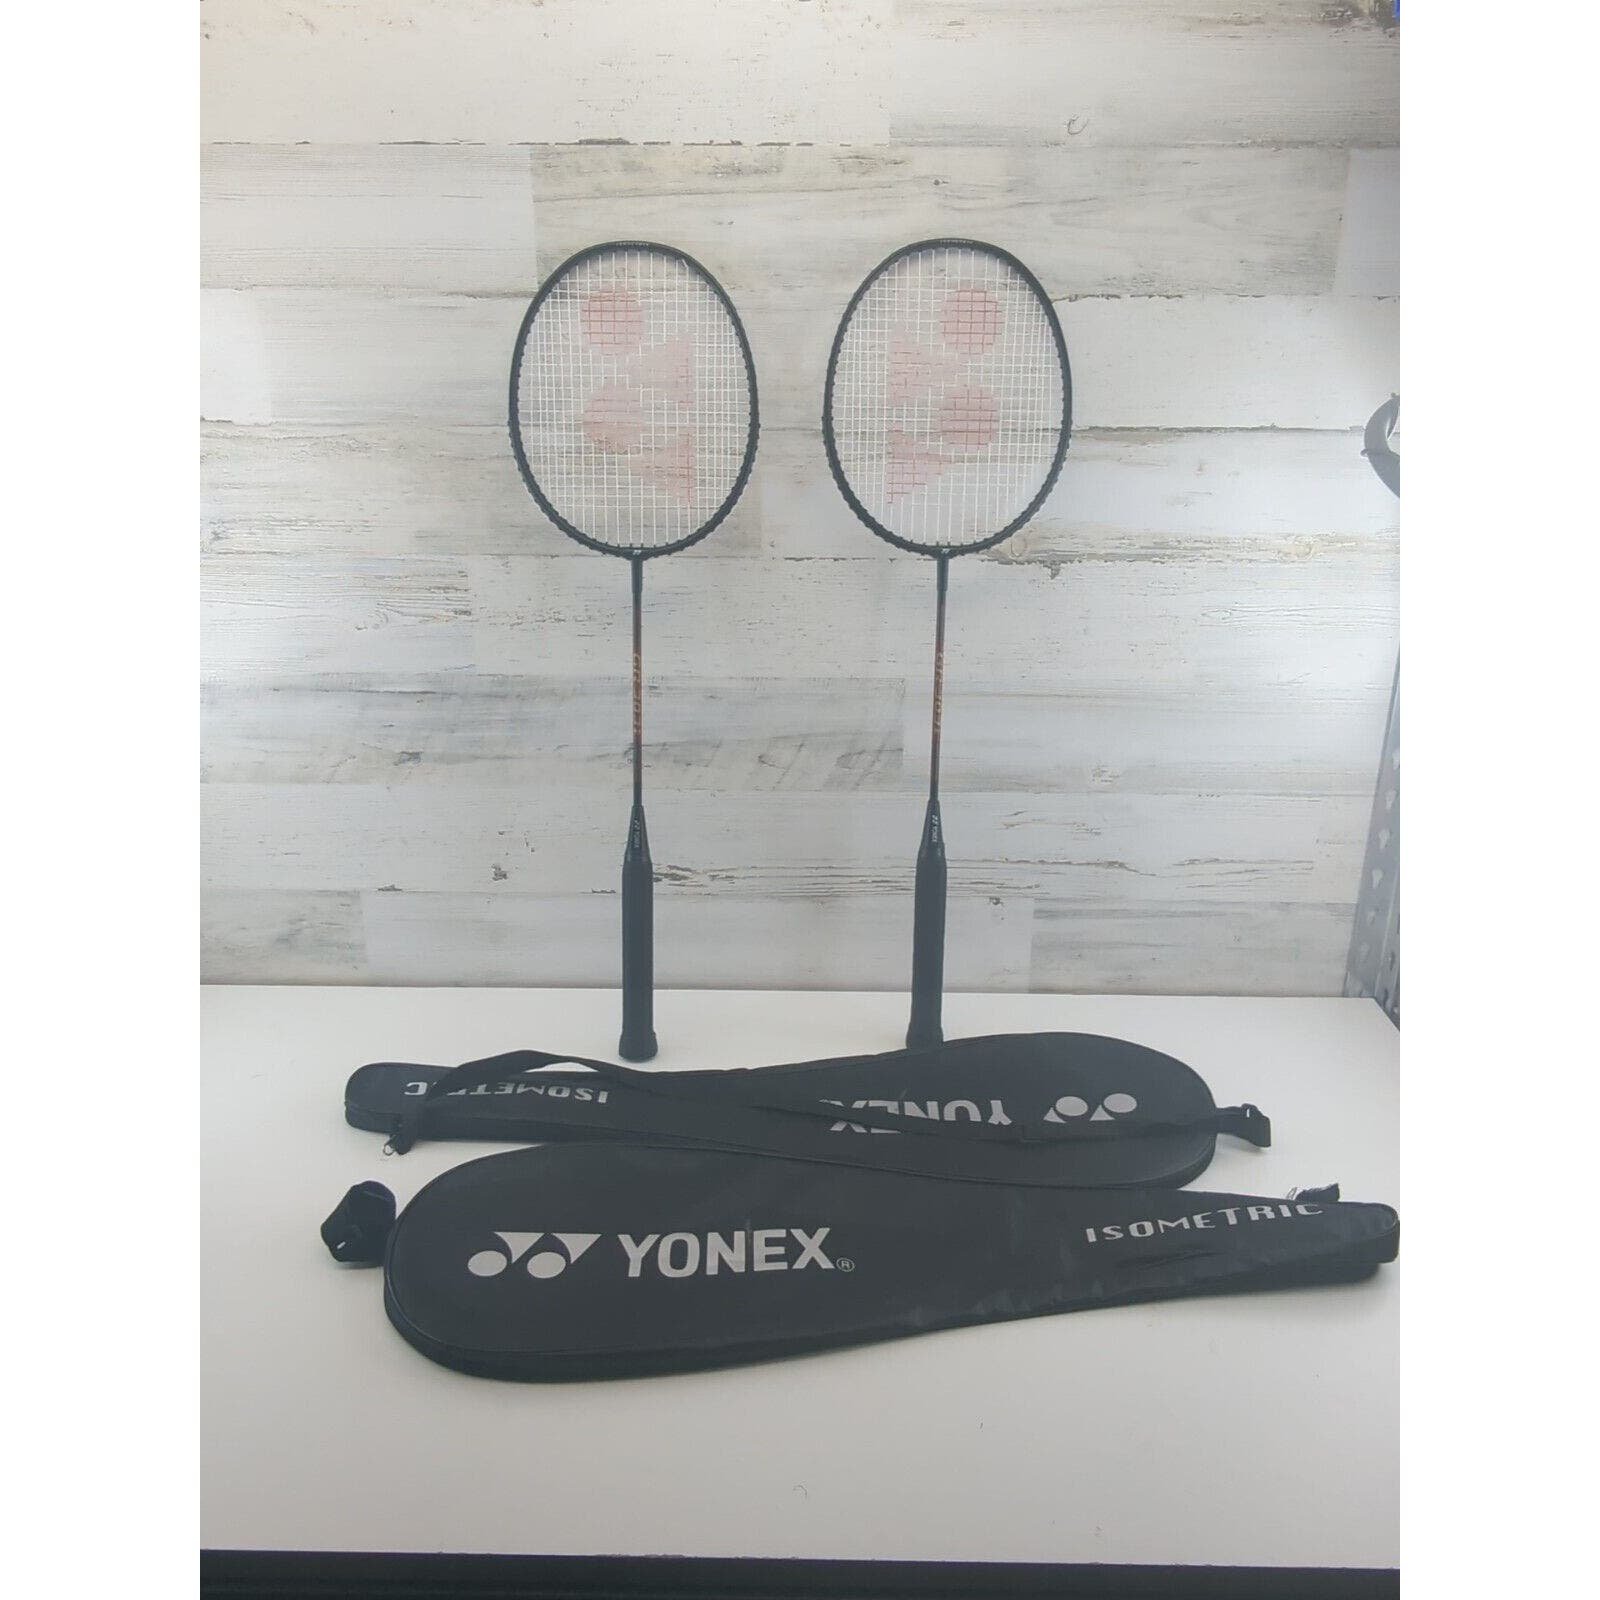 YONEX GR 303i Combo Badminton Racquet with Full Cover, 